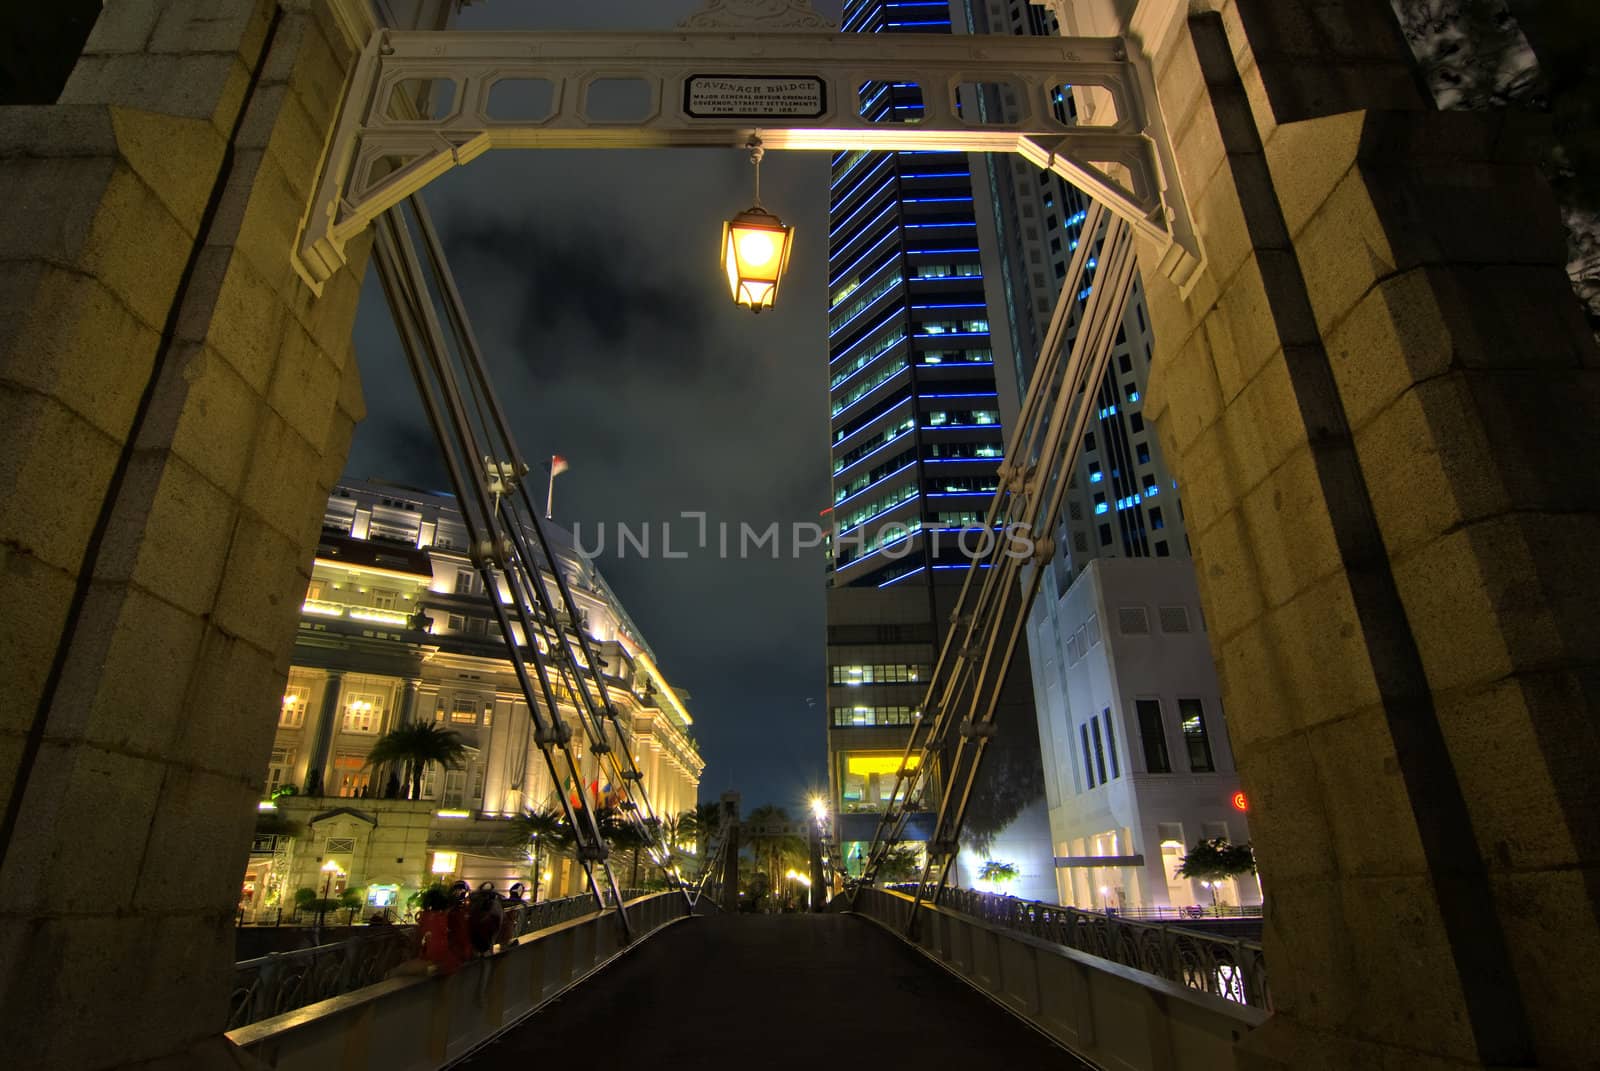 nightline of singapore business district